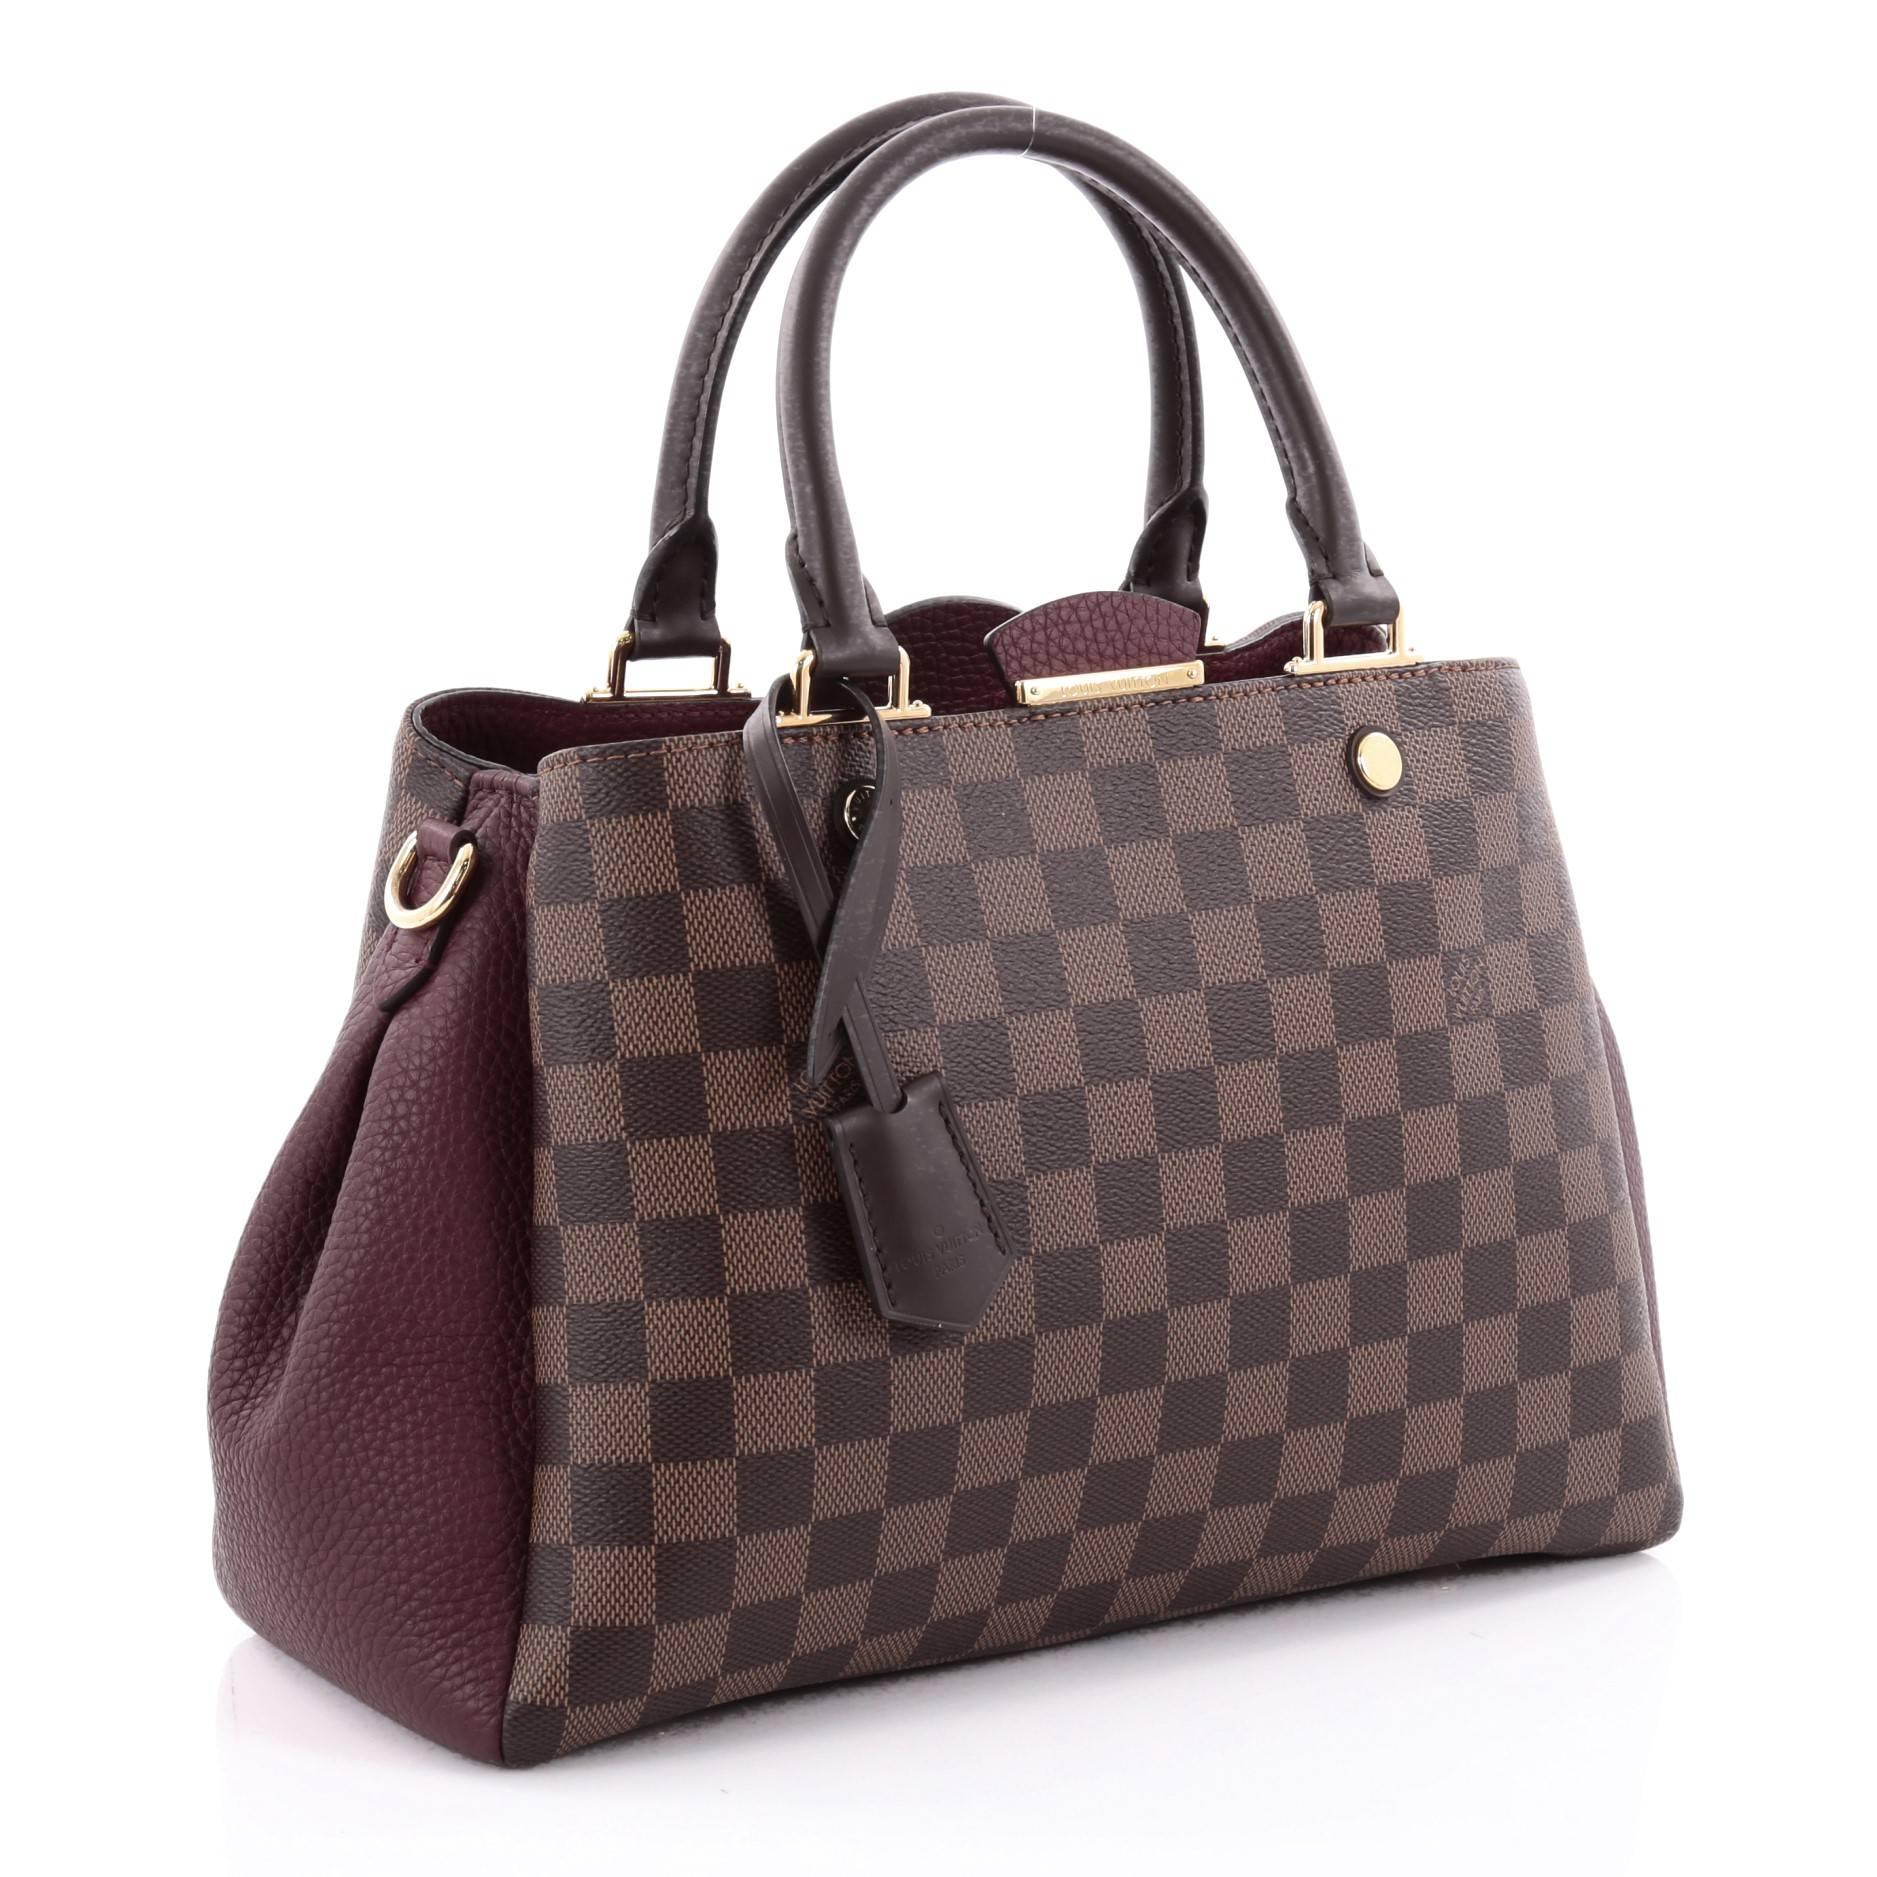 louis vuitton brittany bag price